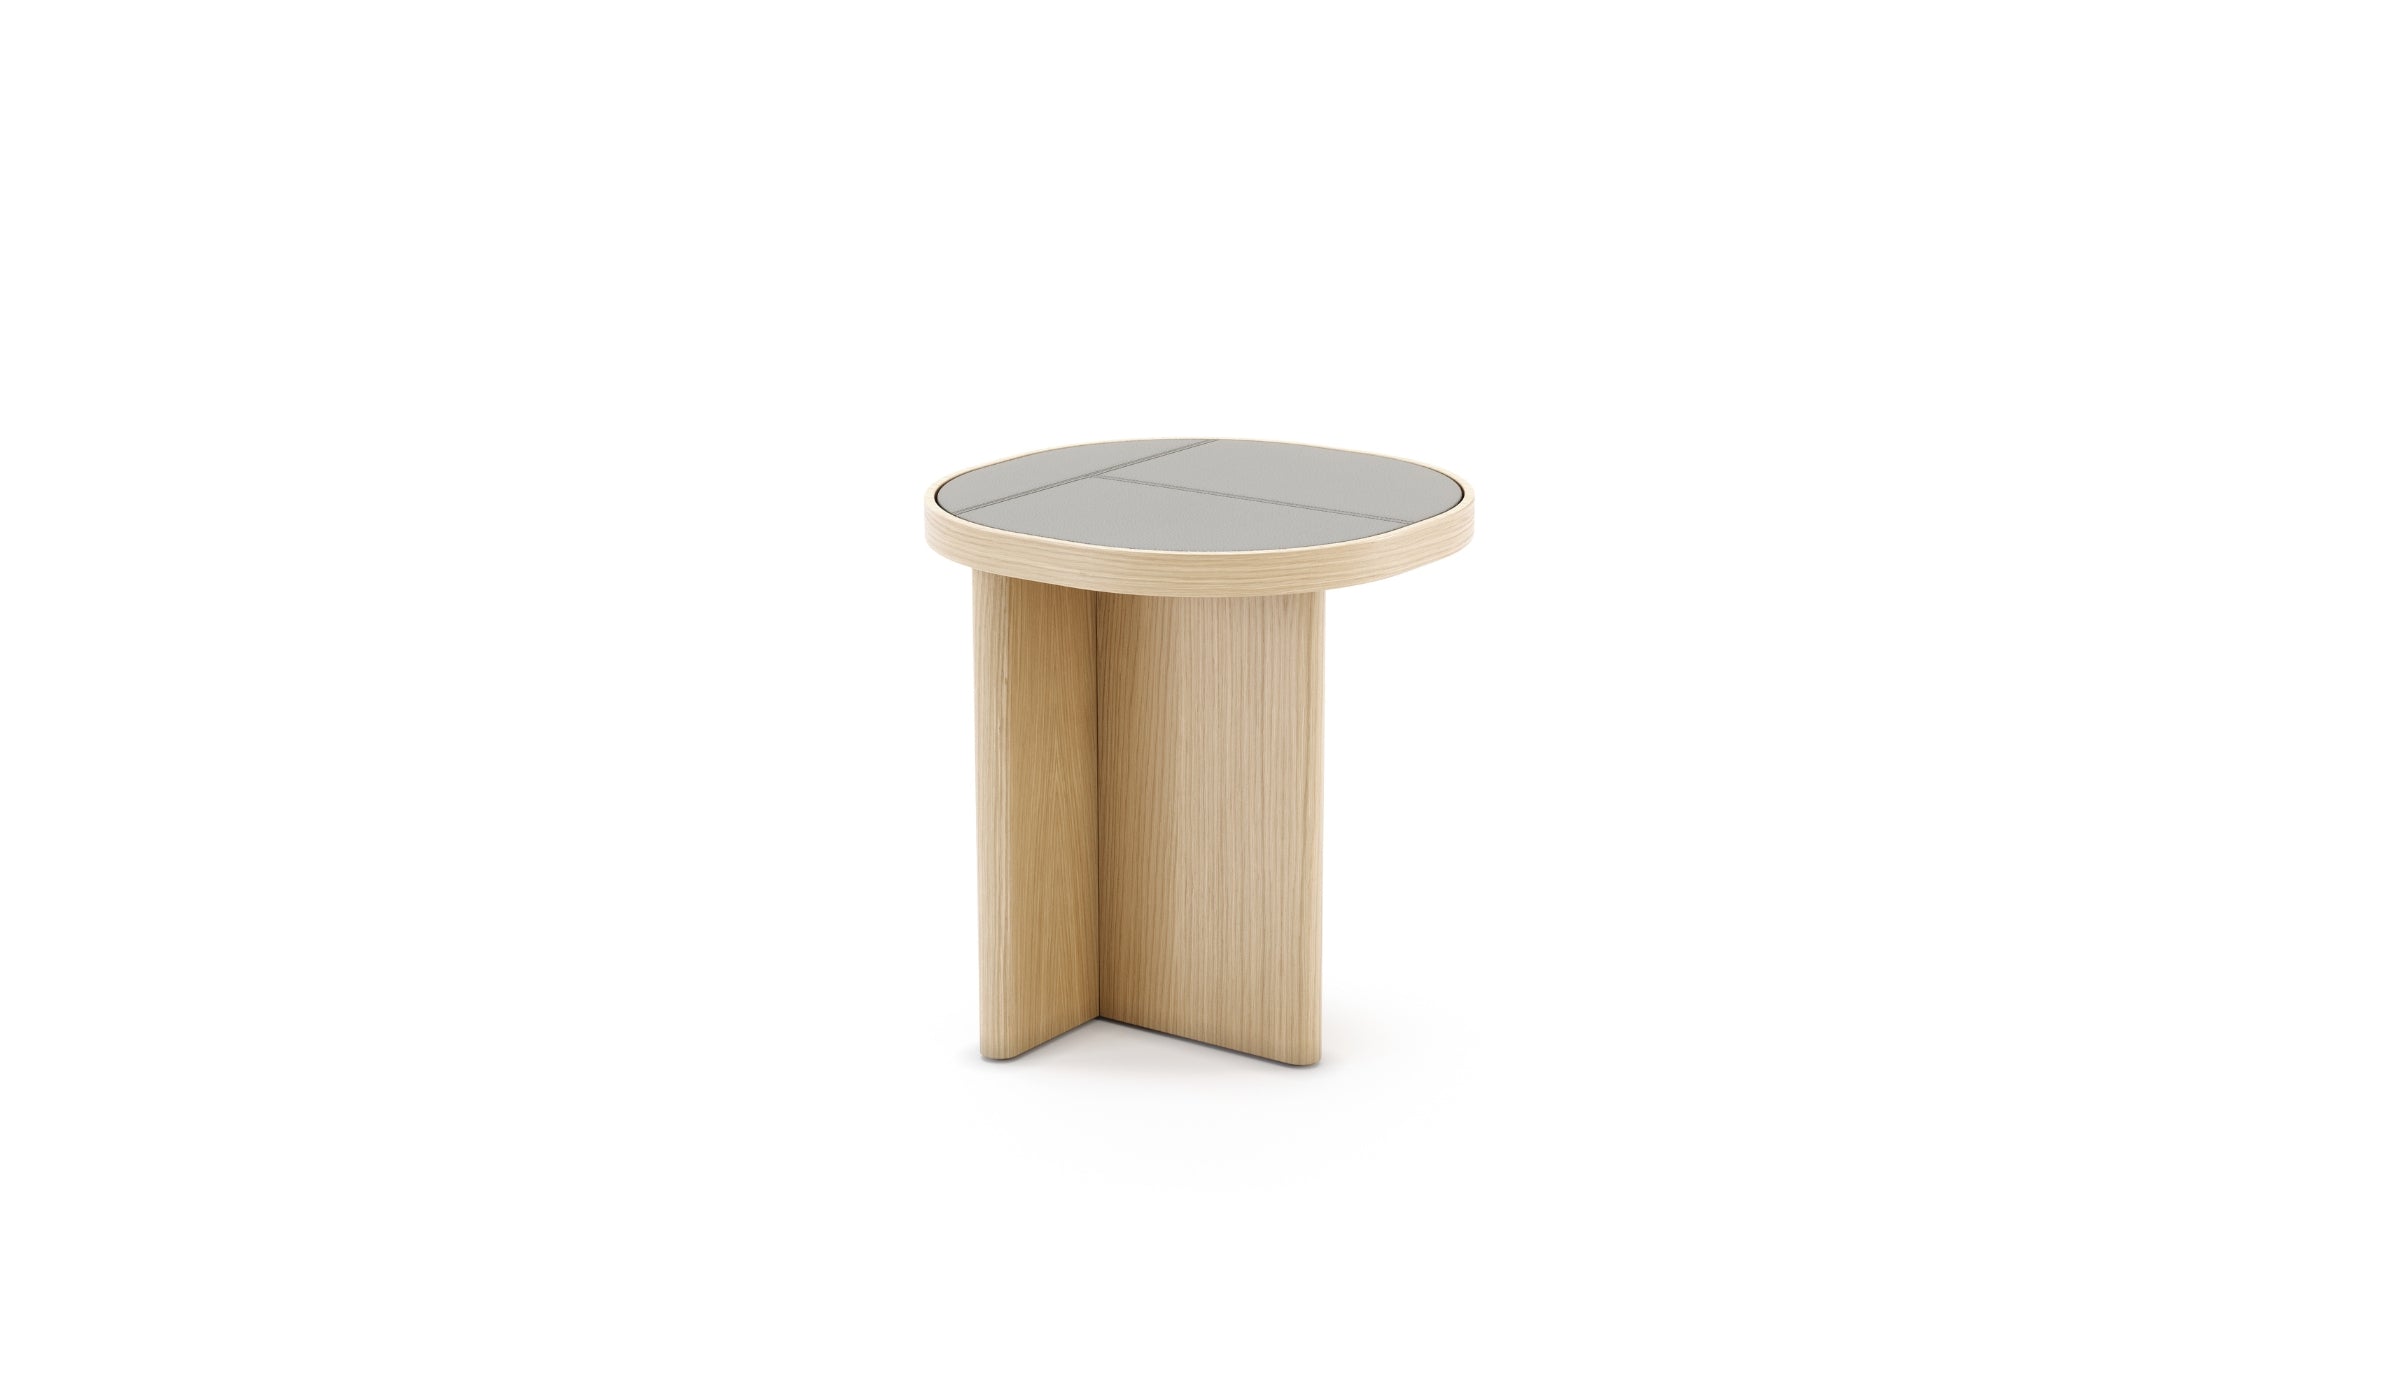 Gilbert - Side table, natural oak, elephant leather finish, S